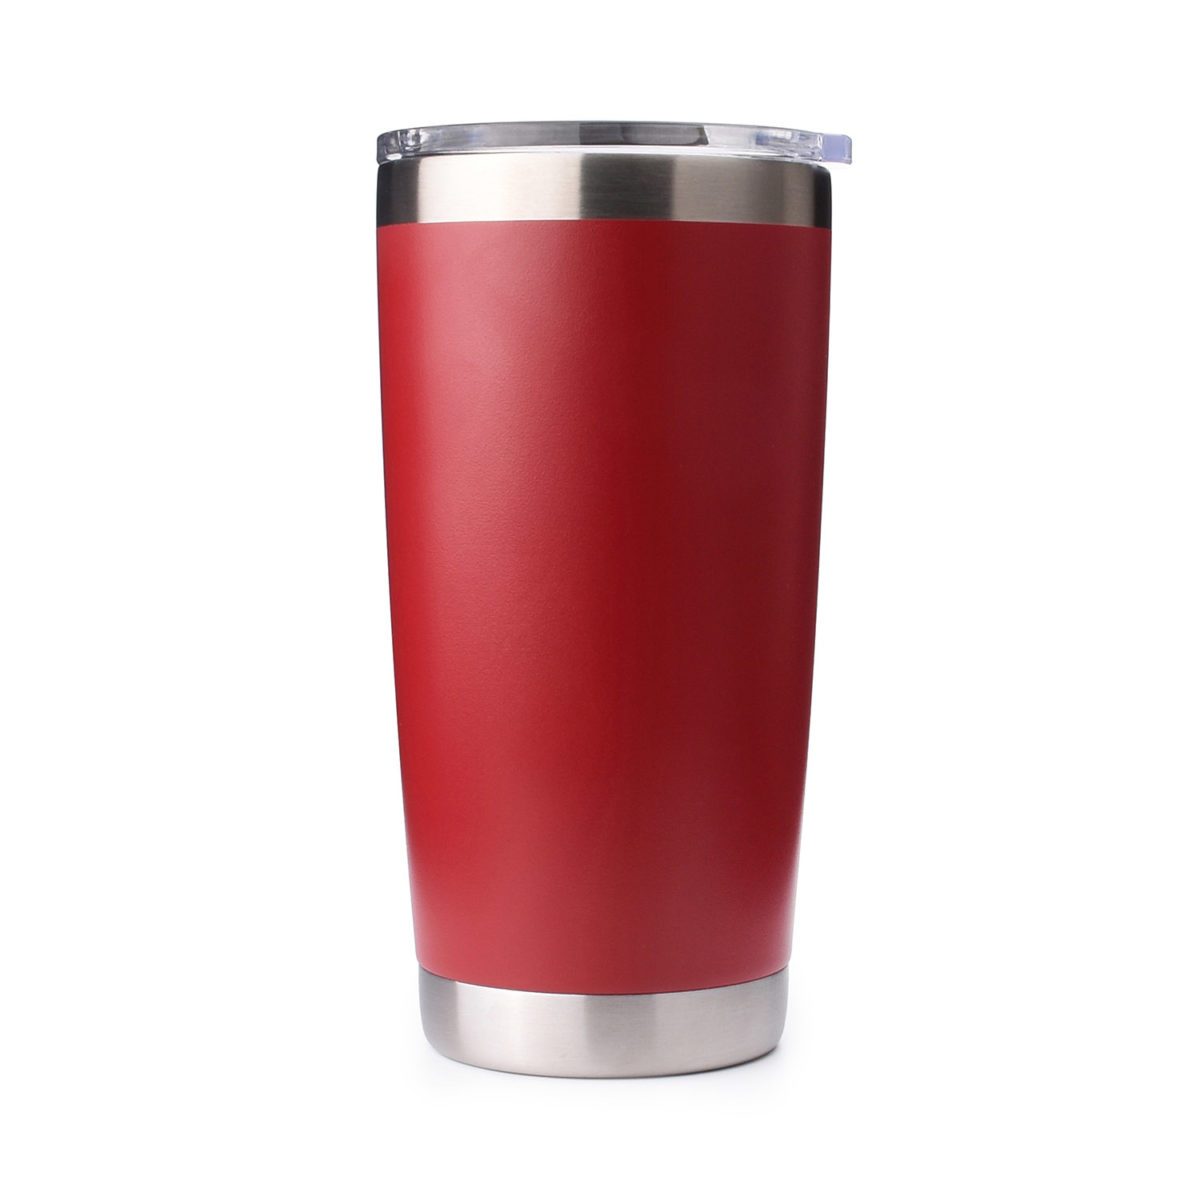 https://www.waterbottle.tech/wp-content/uploads/2021/05/20-oz-tumbler-with-magnetic-slider-lid-s2120a3-1-1200x1200.jpg